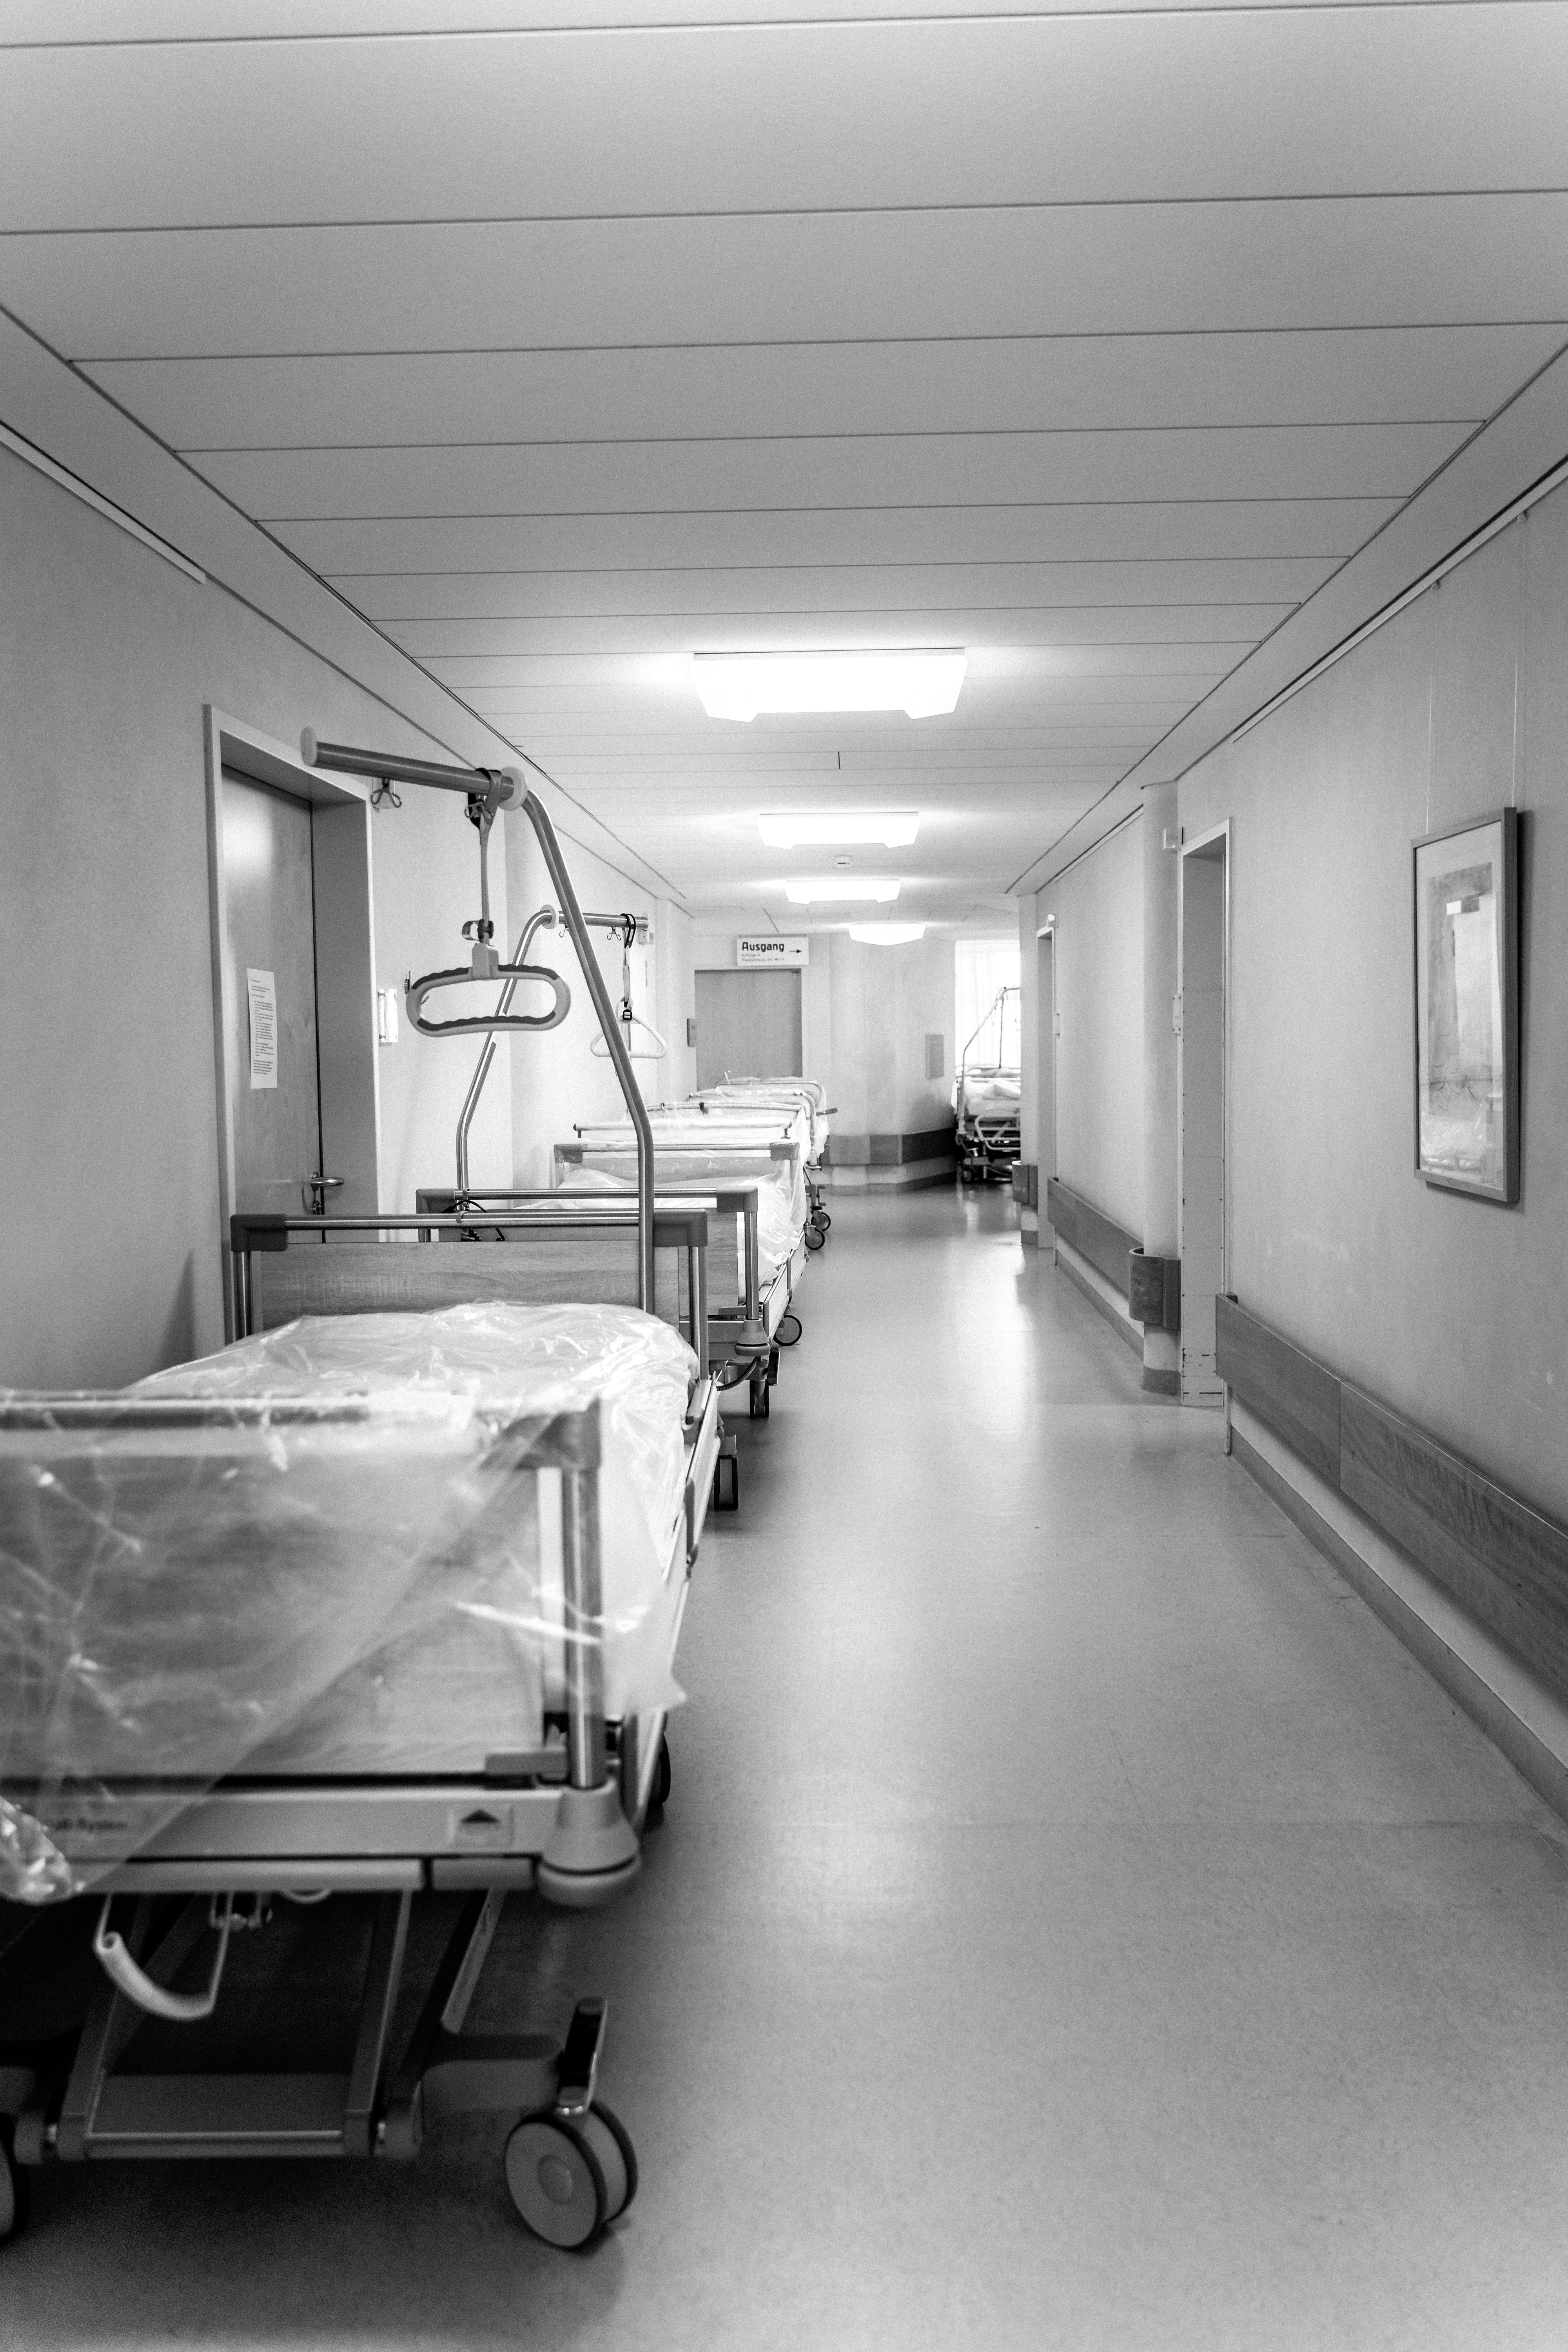 Image of a black and white hospital hallway